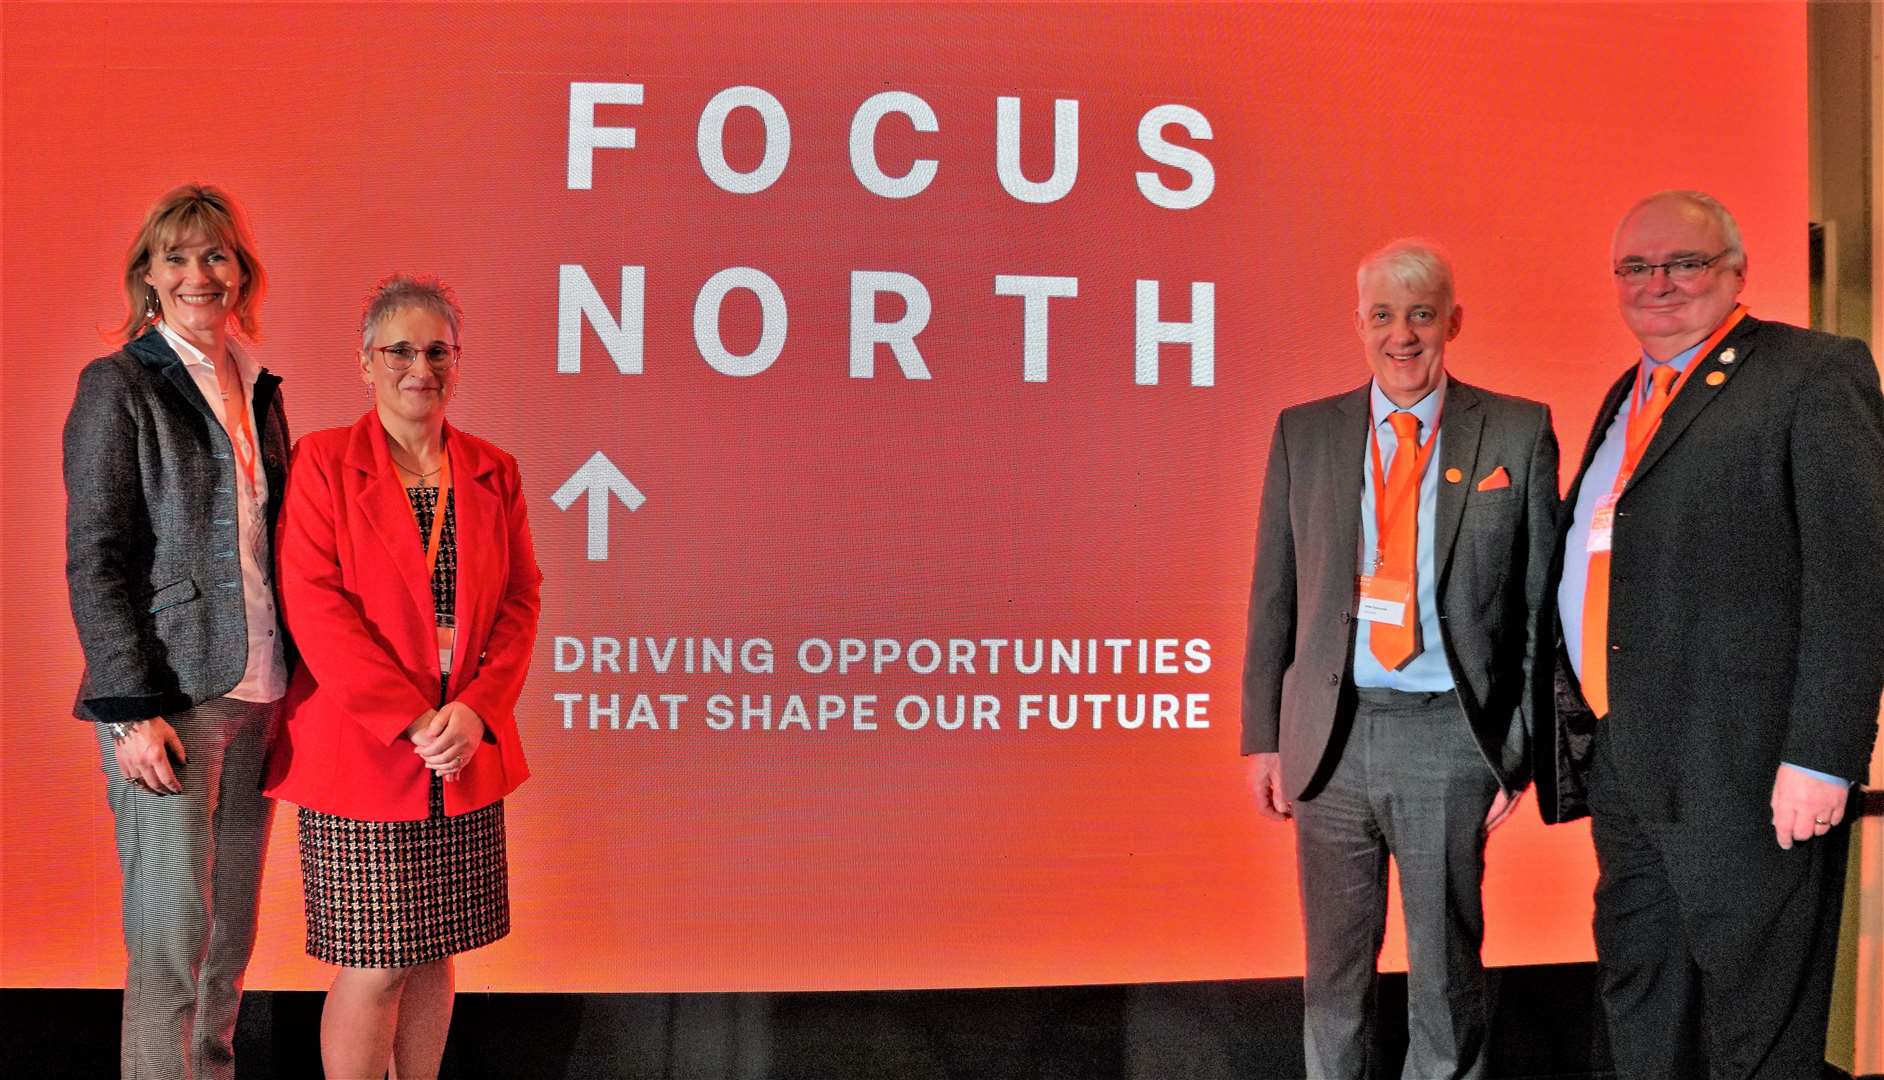 Focus North held an event at the Weigh Inn hotel in Thurso earlier this year. Picture: DGS